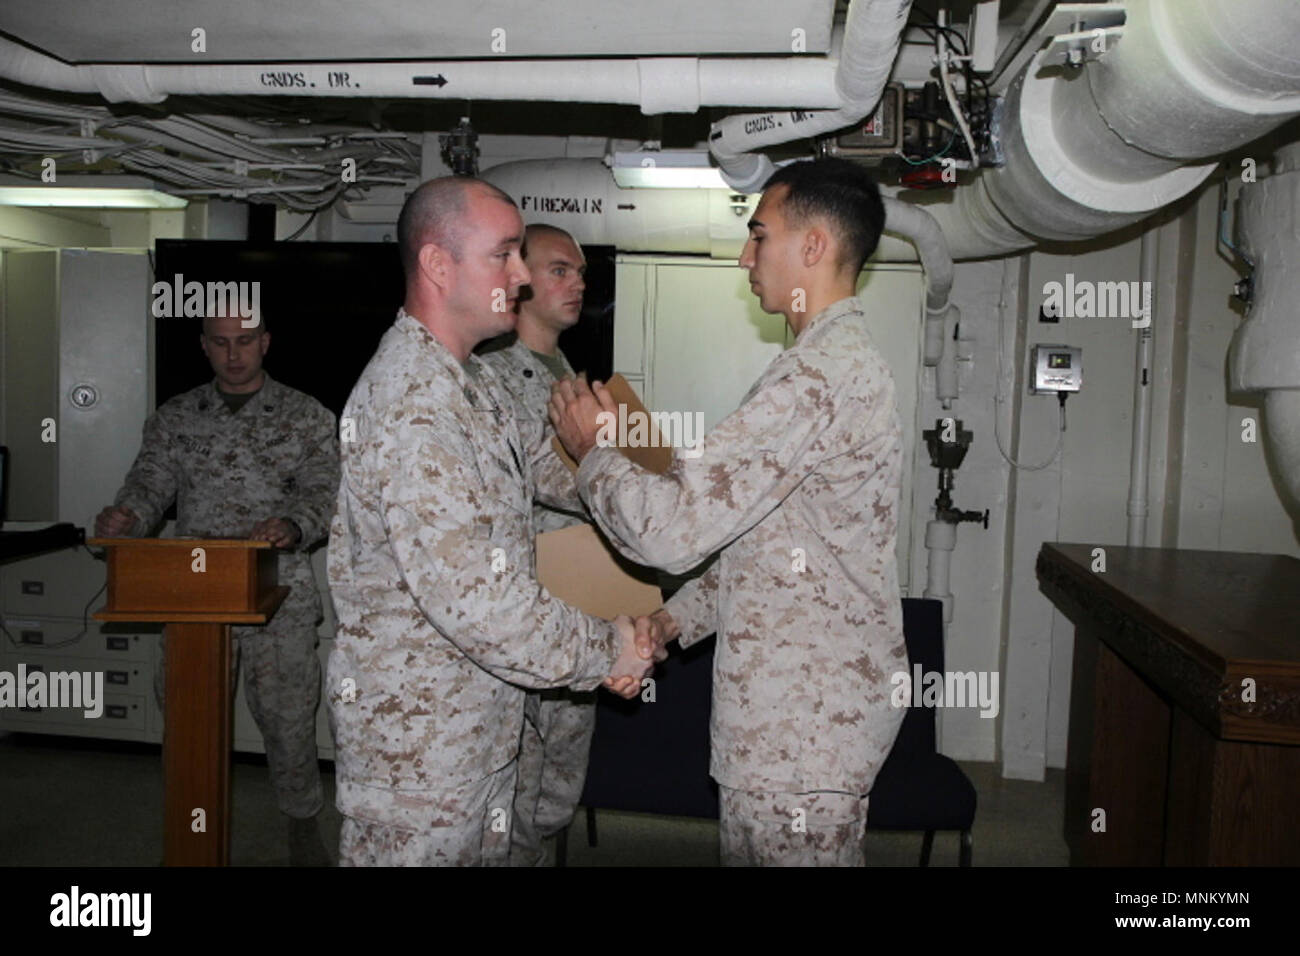 MEDITERRANEAN SEA (March 16, 2018) U.S. Marine Corps Lance Cpl. James Boncore assigned to Command Element, 26th Marine Expeditionary Unit (MEU) receives a certificate of completion during a Lance Corporal’s Leadership Seminar graduation ceremony aboard the San Antonio-class amphibious transport dock USS New York (LPD 21) March 16, 2018. The course teaches Marines ethics, values and leadership skills to develop their character and teach them the importance of small unit leadership in the U.S. Marine Corps while deployed to the U.S. 6th Fleet area of operations. U.S. 6th Fleet, headquartered in  Stock Photo